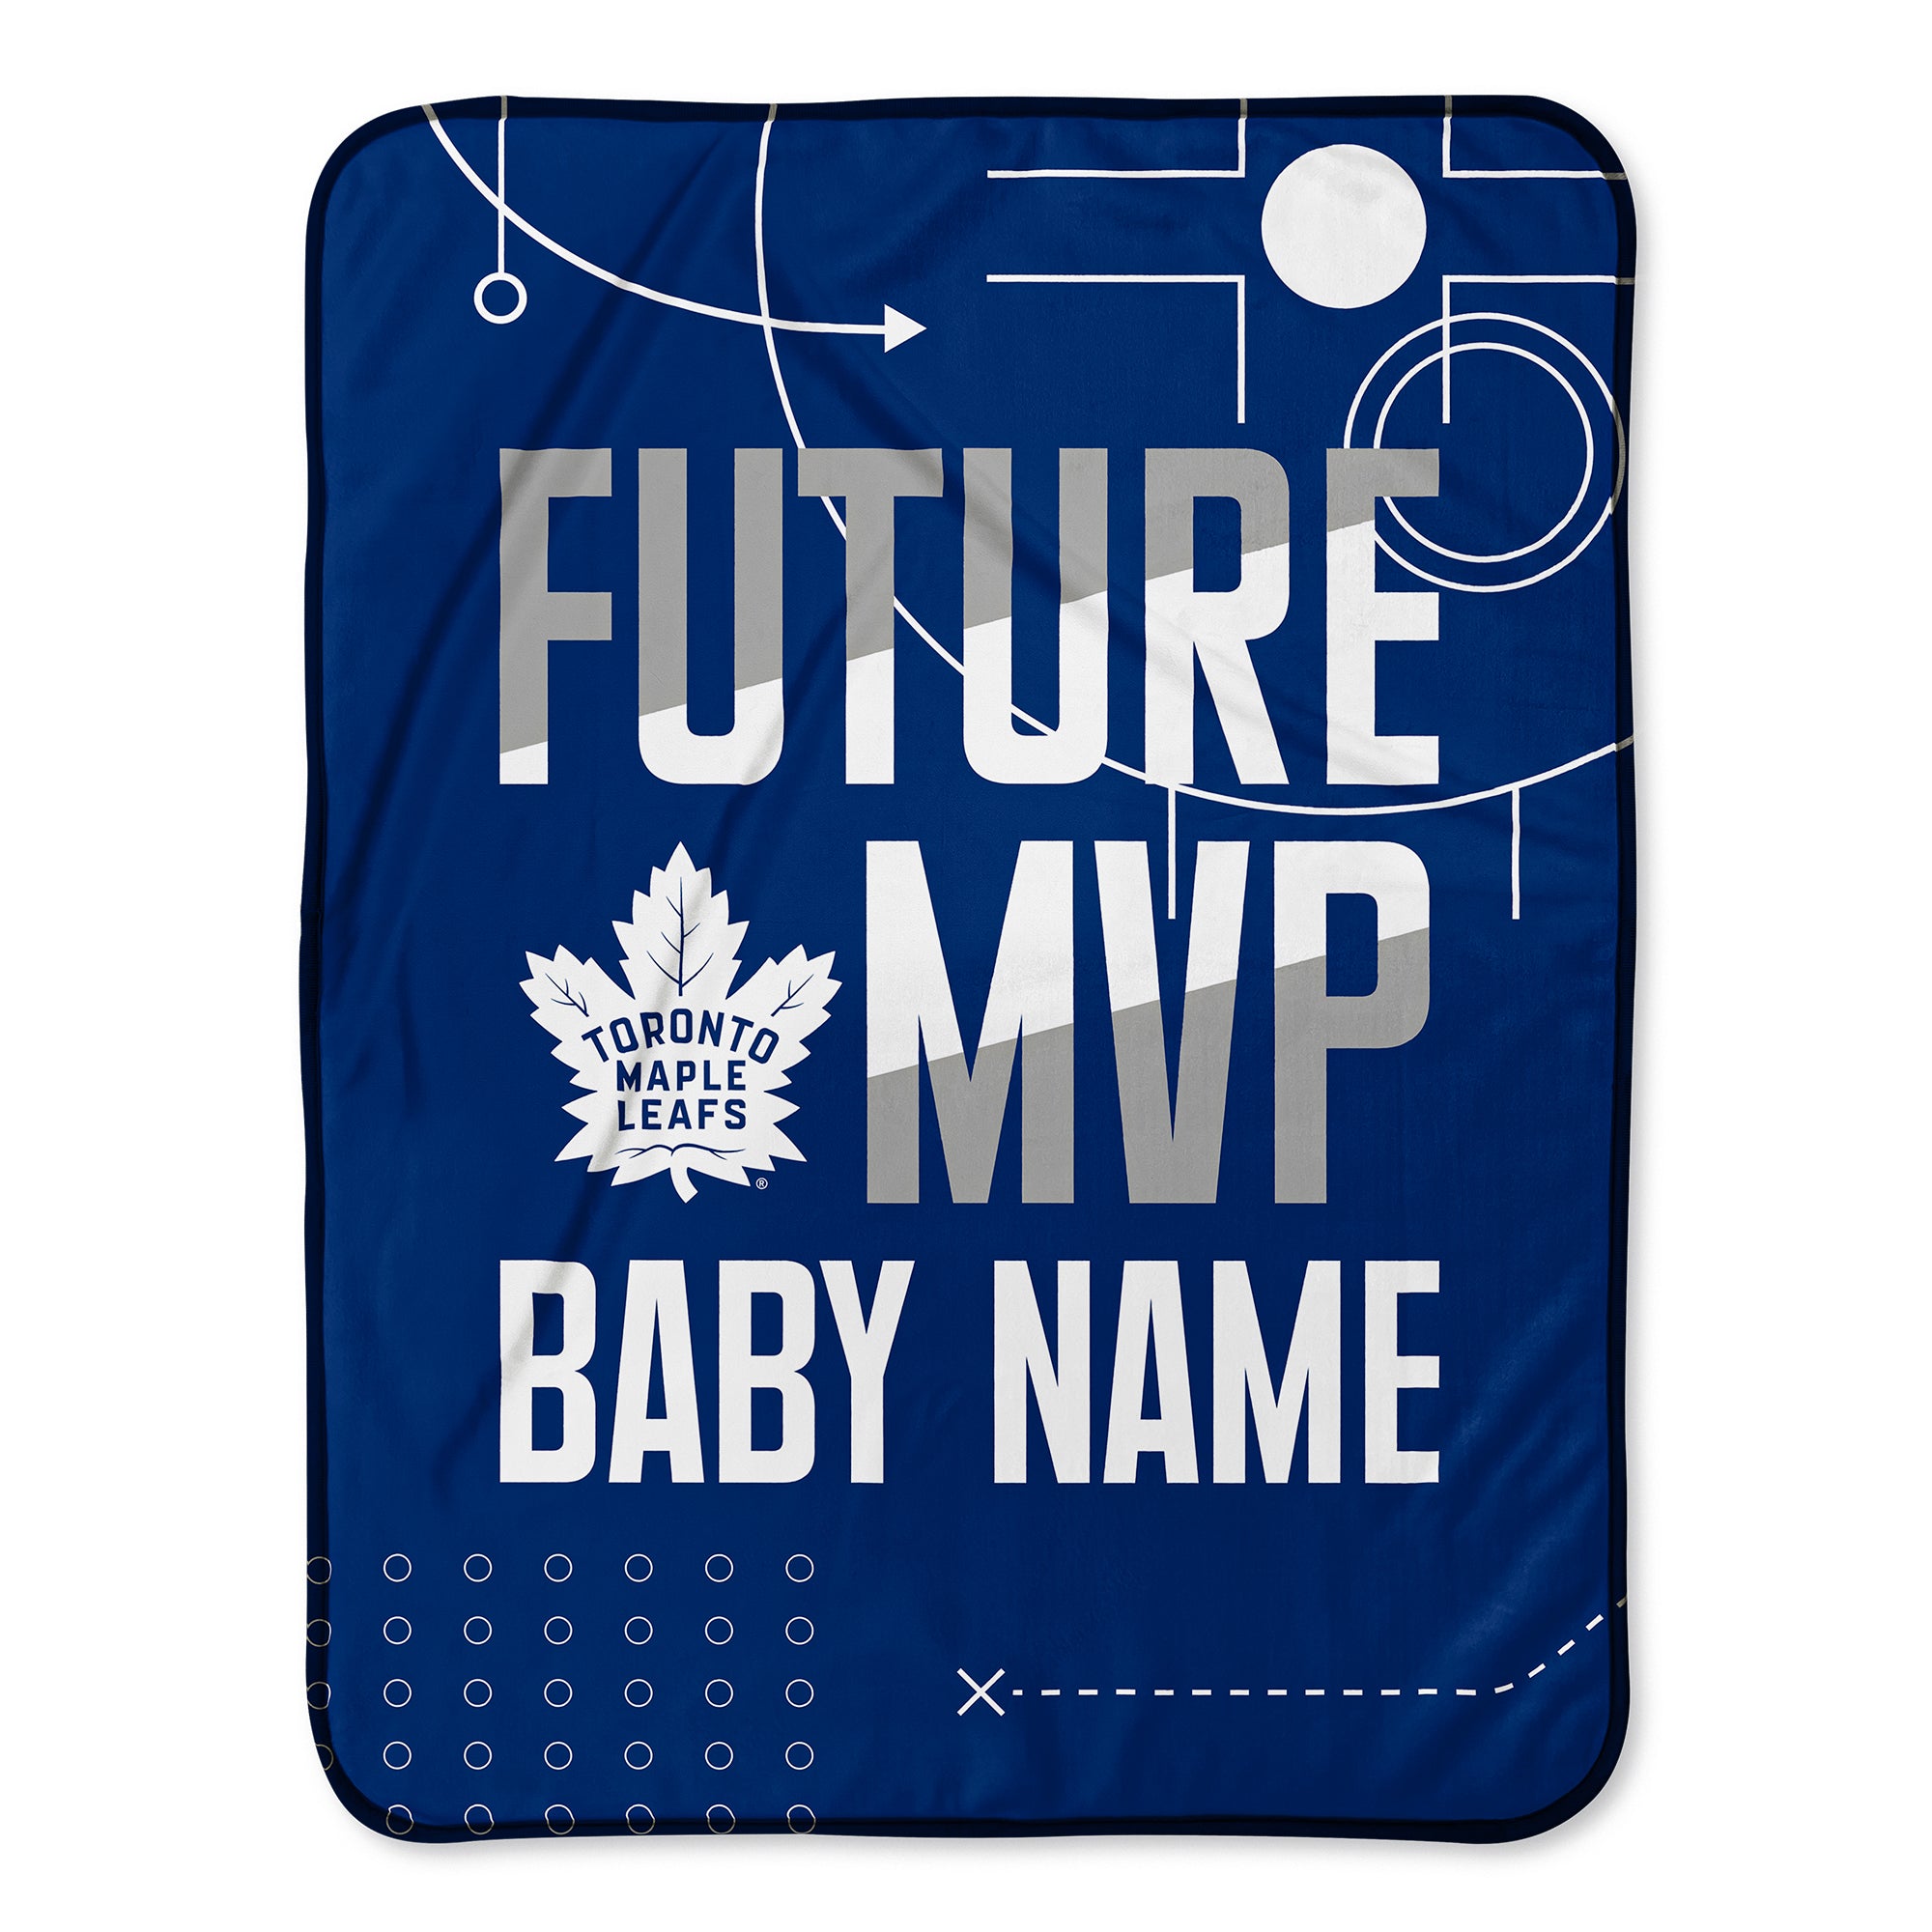 White Toronto Maple Leafs Personalized Baby Blanket